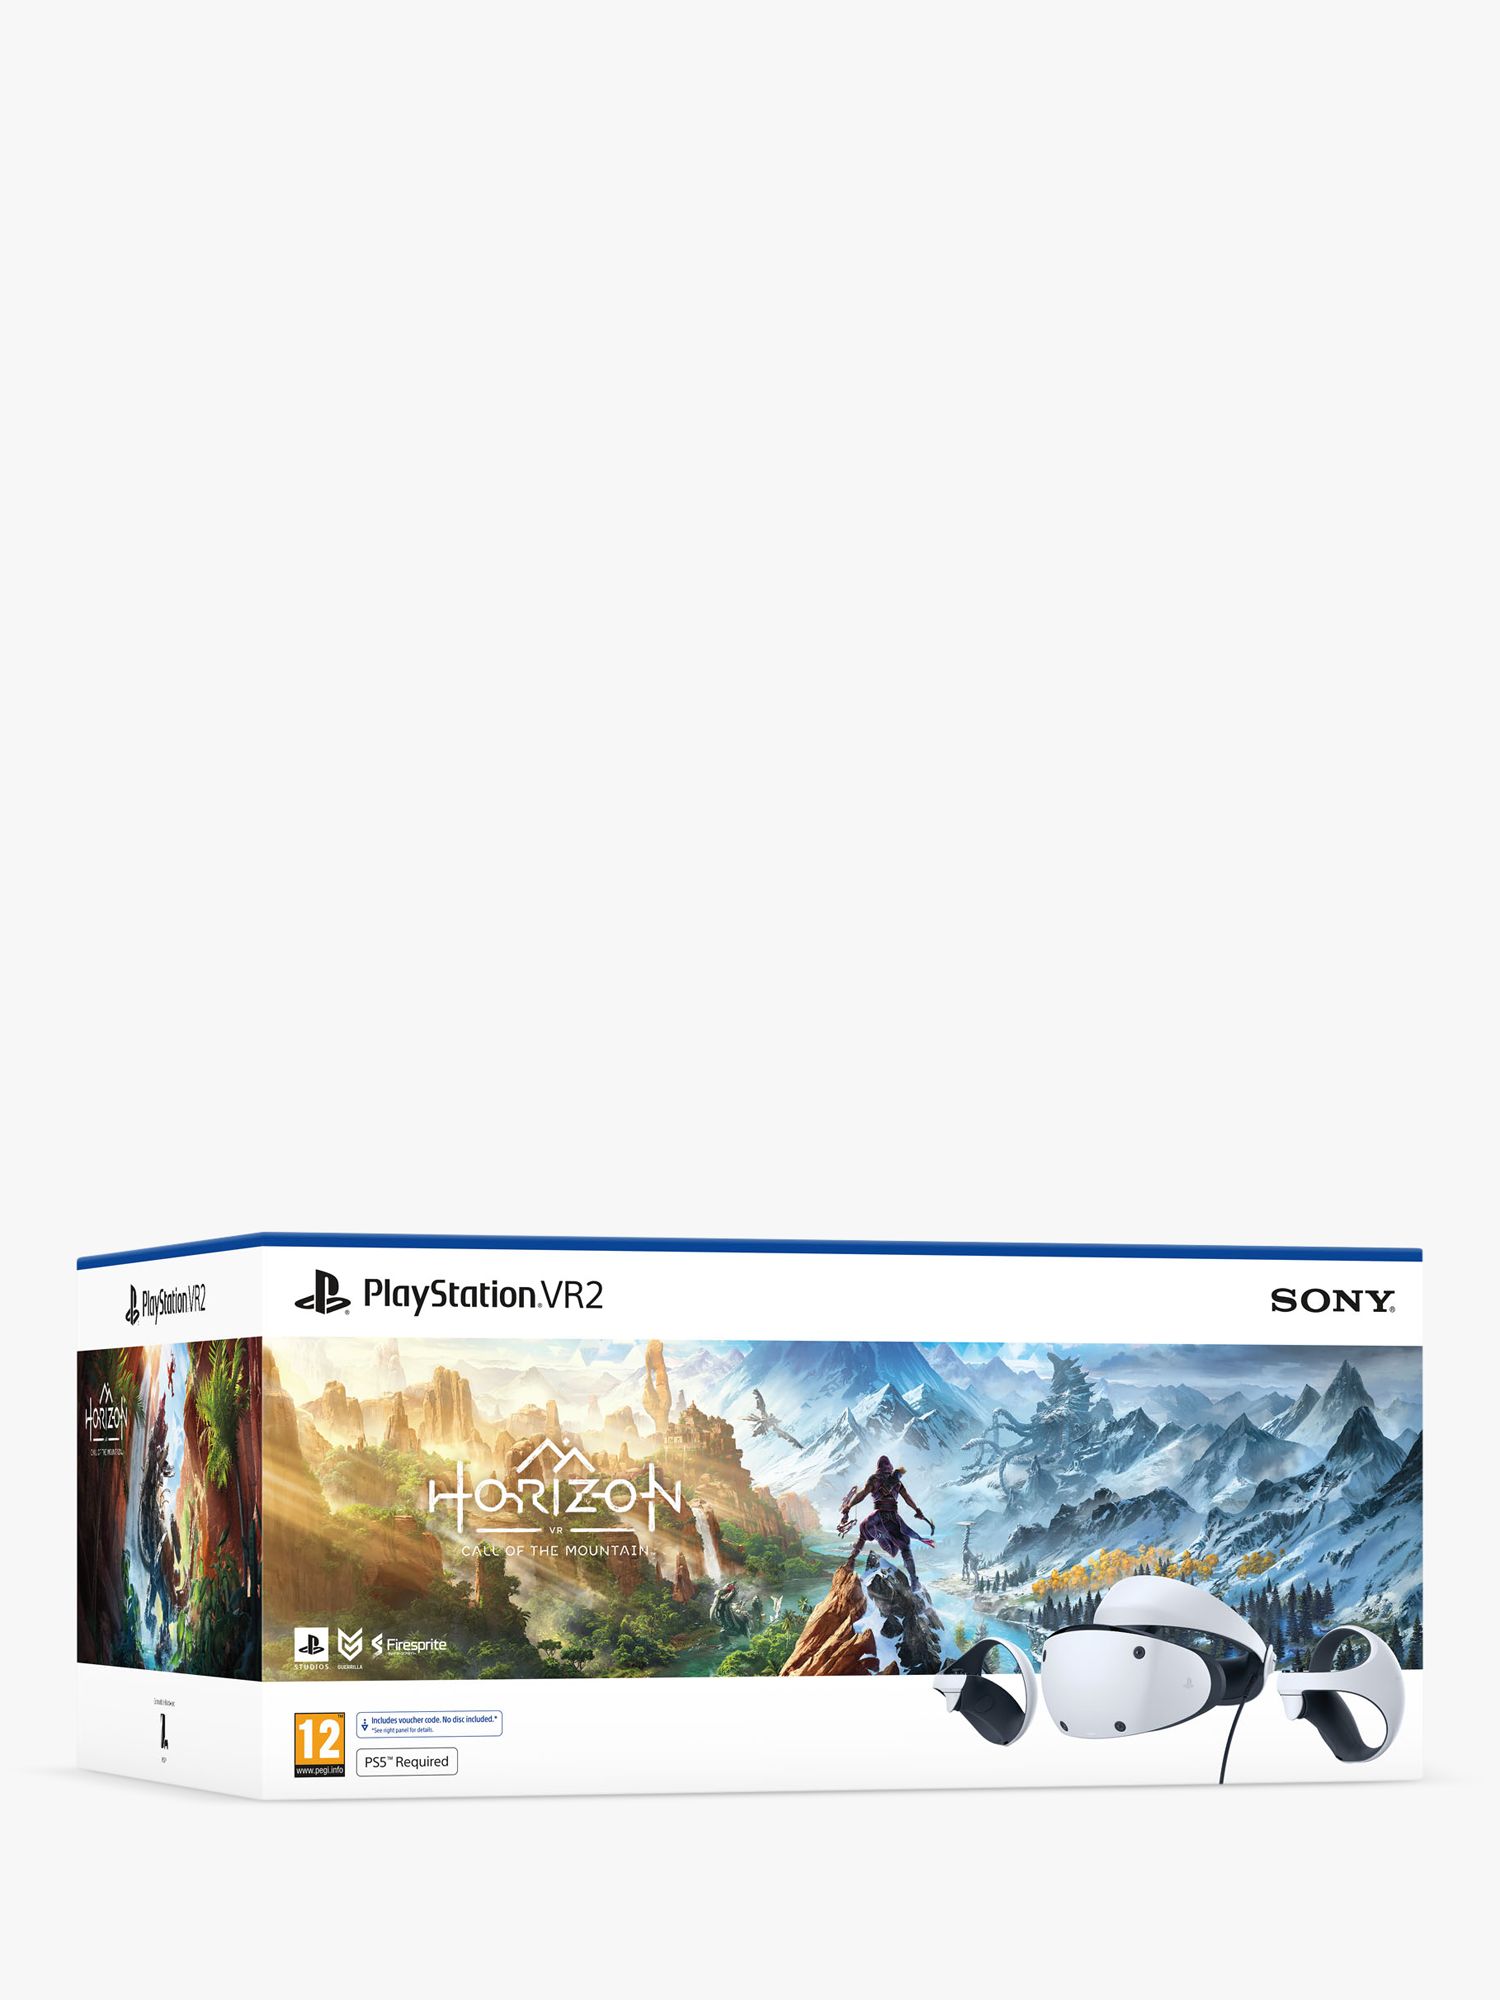 PlayStation VR2 & Horizon Call of the Mountain Bundle